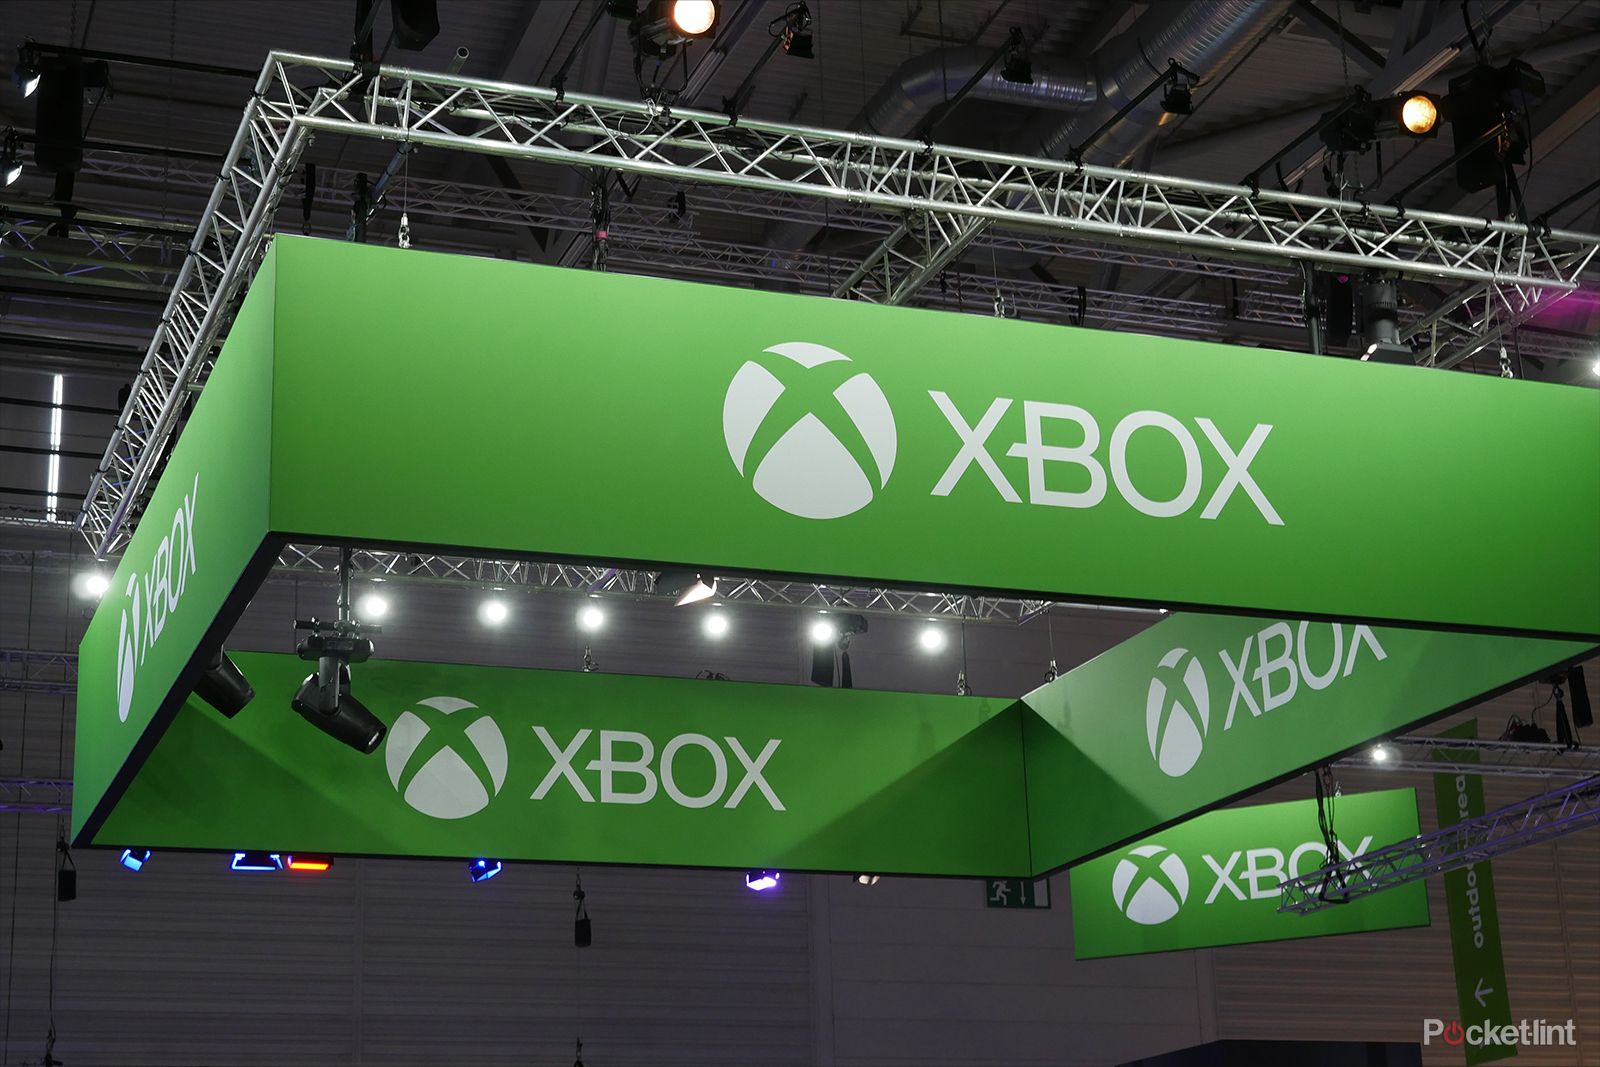 Xbox logos hanging from the ceiling at a trade show